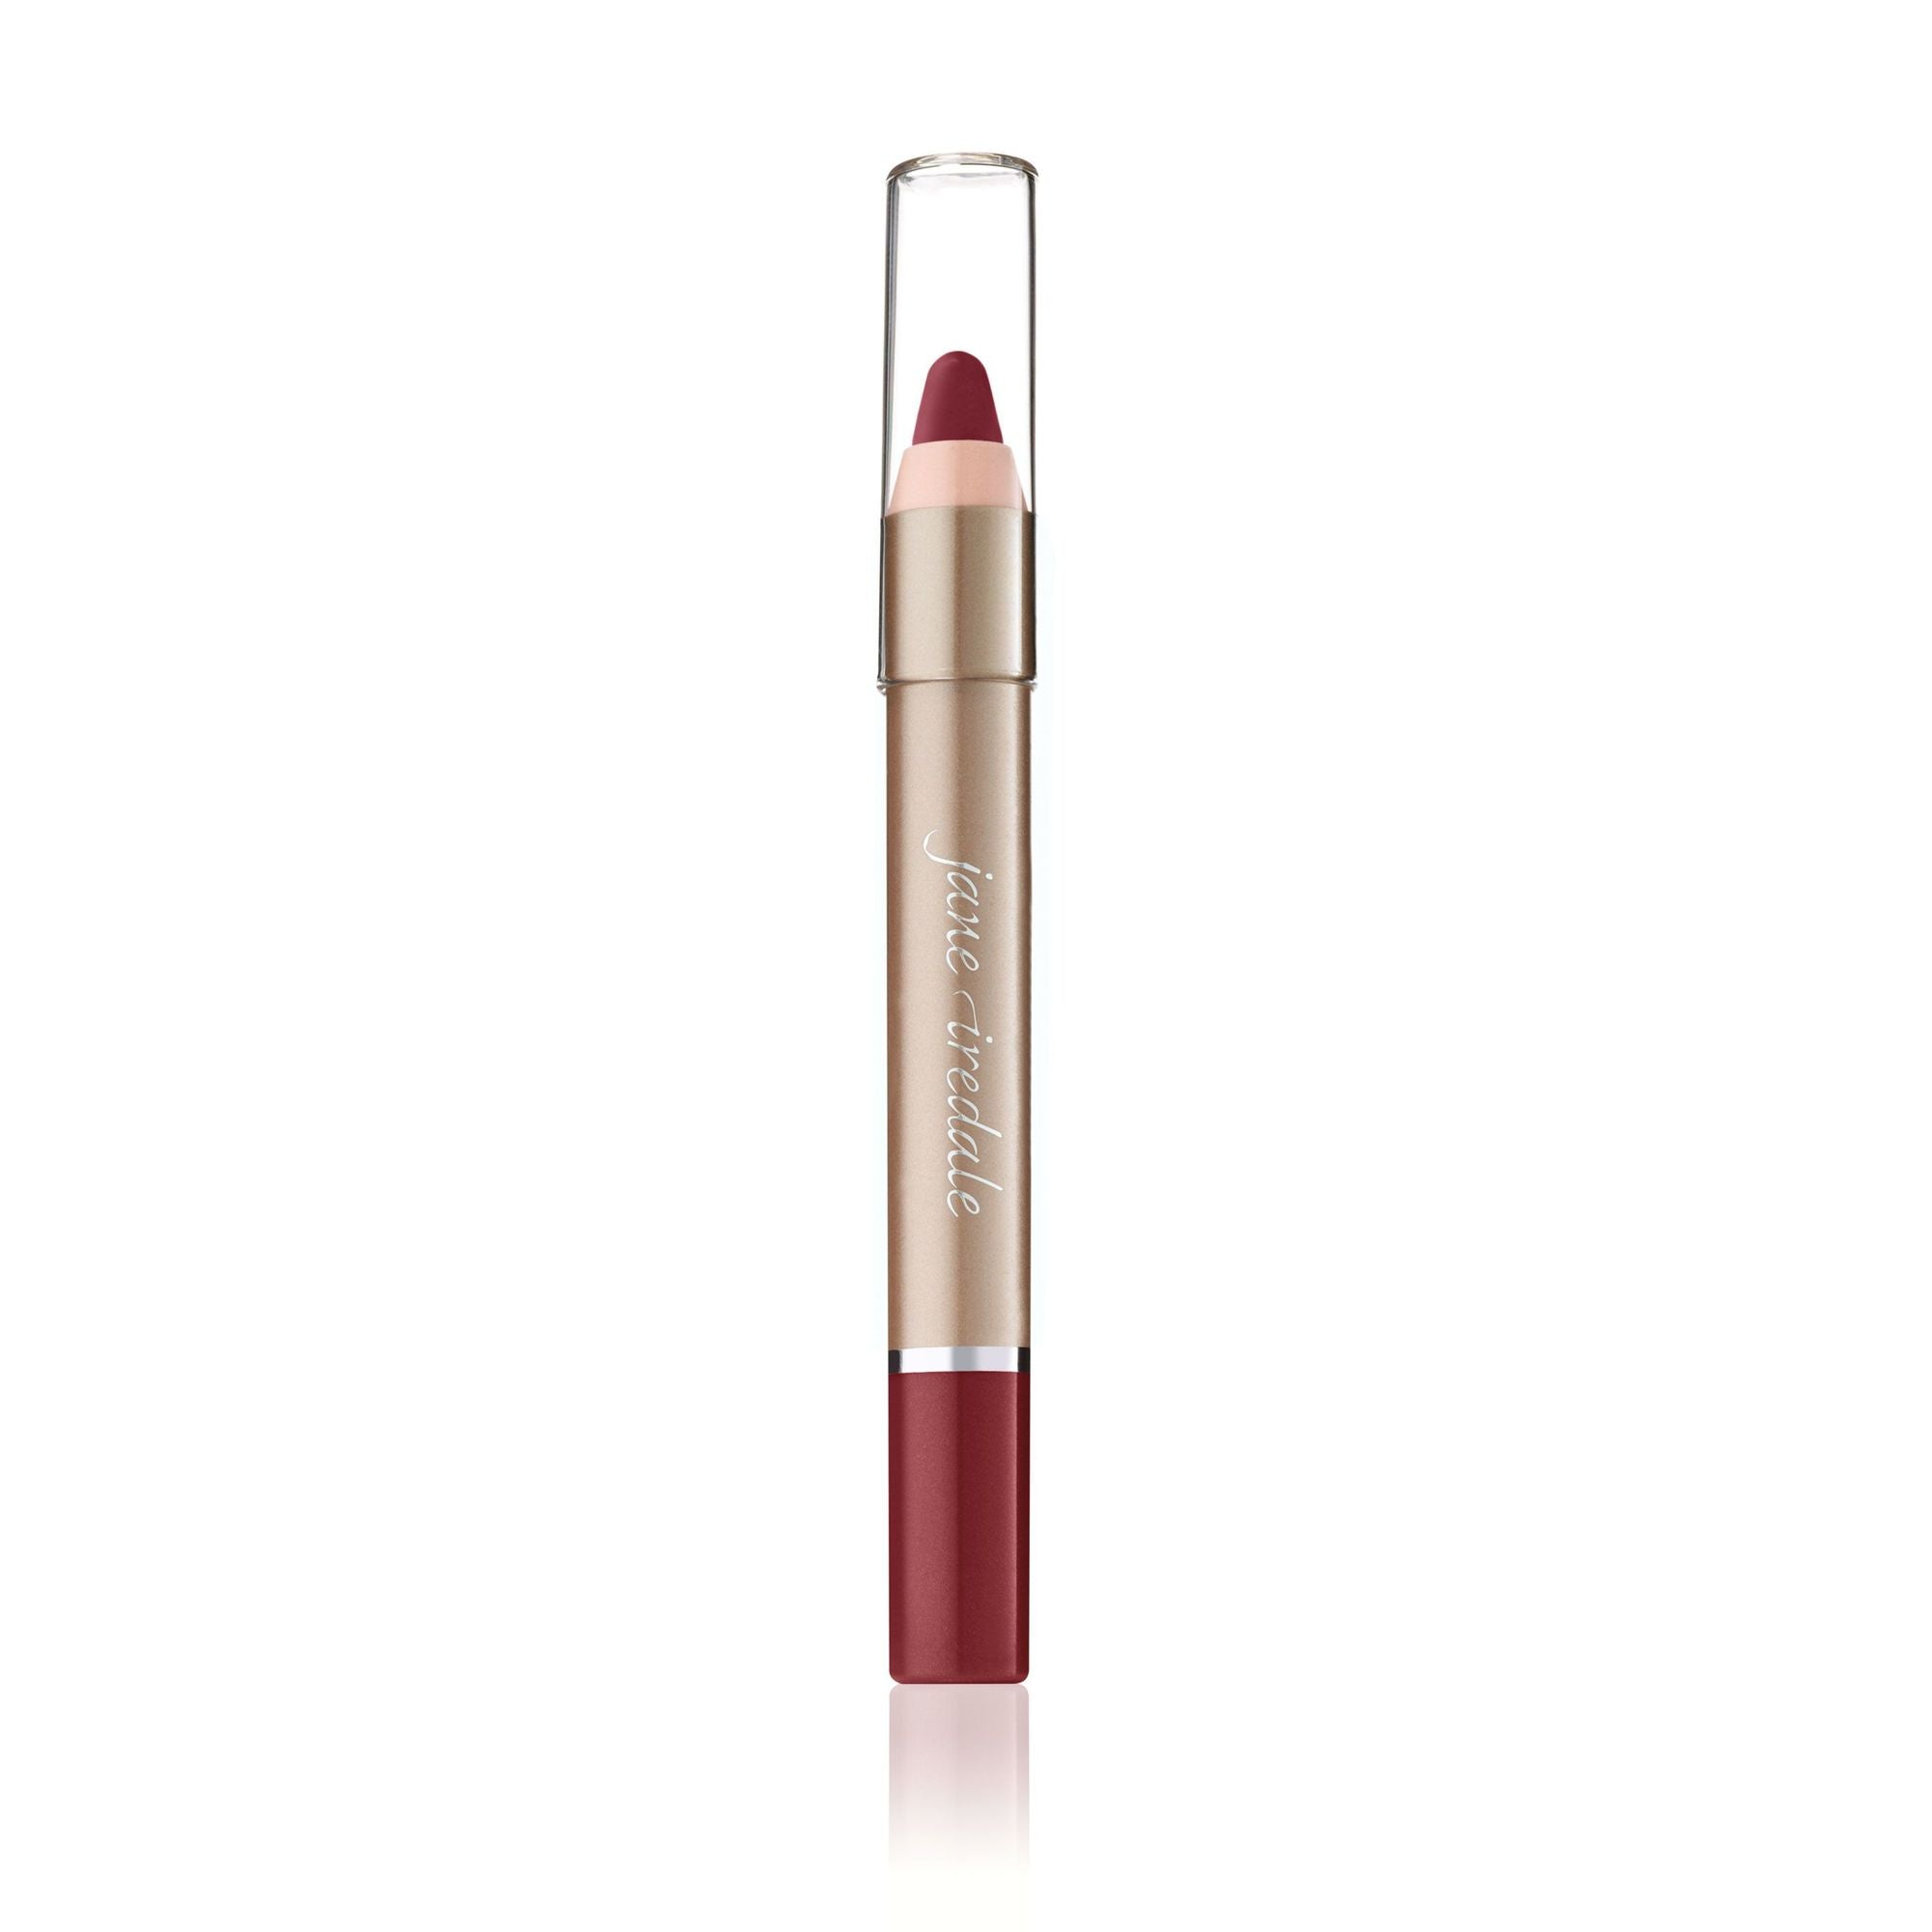 JANE IREDALE PLAY ON LIP CRAYON